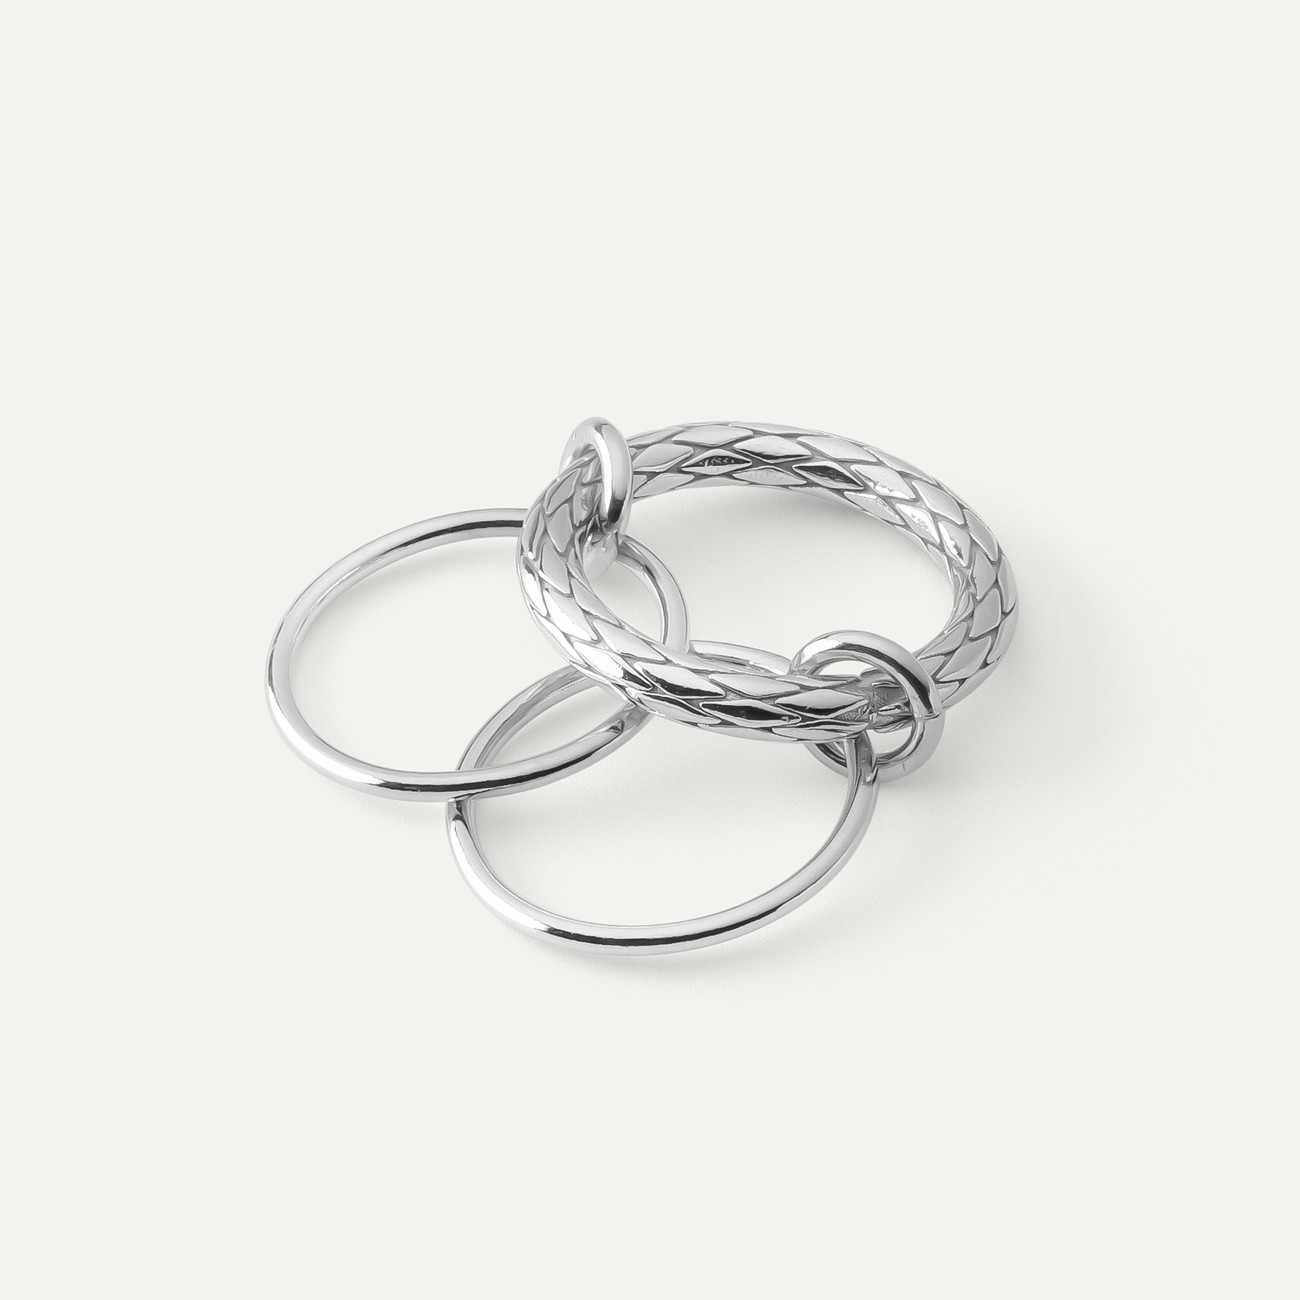 Oval ring, silber 925, XENIA x GIORRE